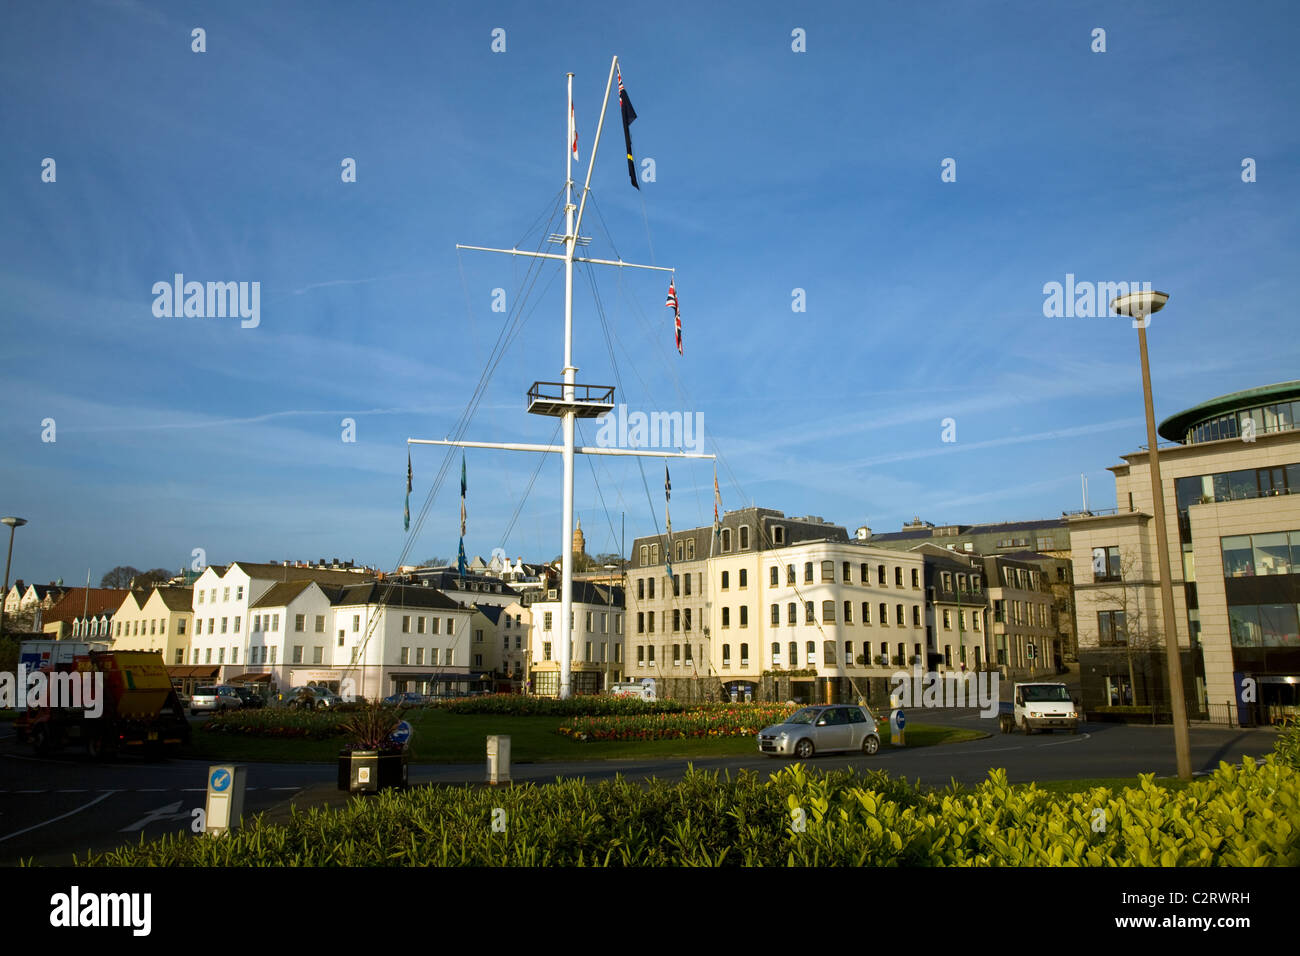 Mast traffic roundabout St Peter Port Guernsey, Channel islands Stock Photo